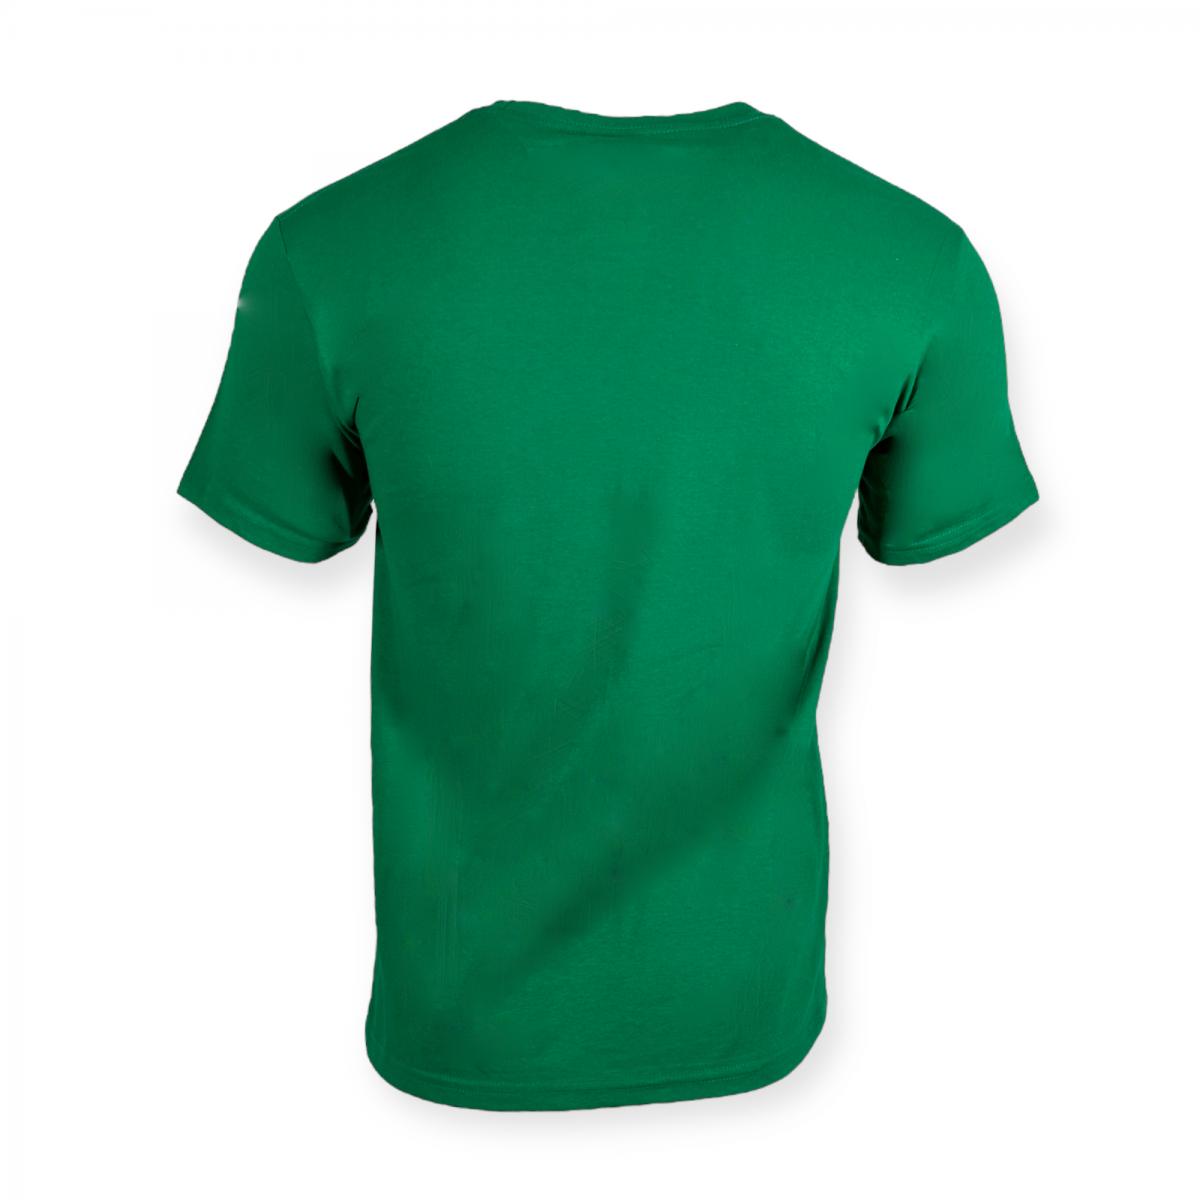 Playera Deportiva Green Bay Packers Hombre NFL 5635